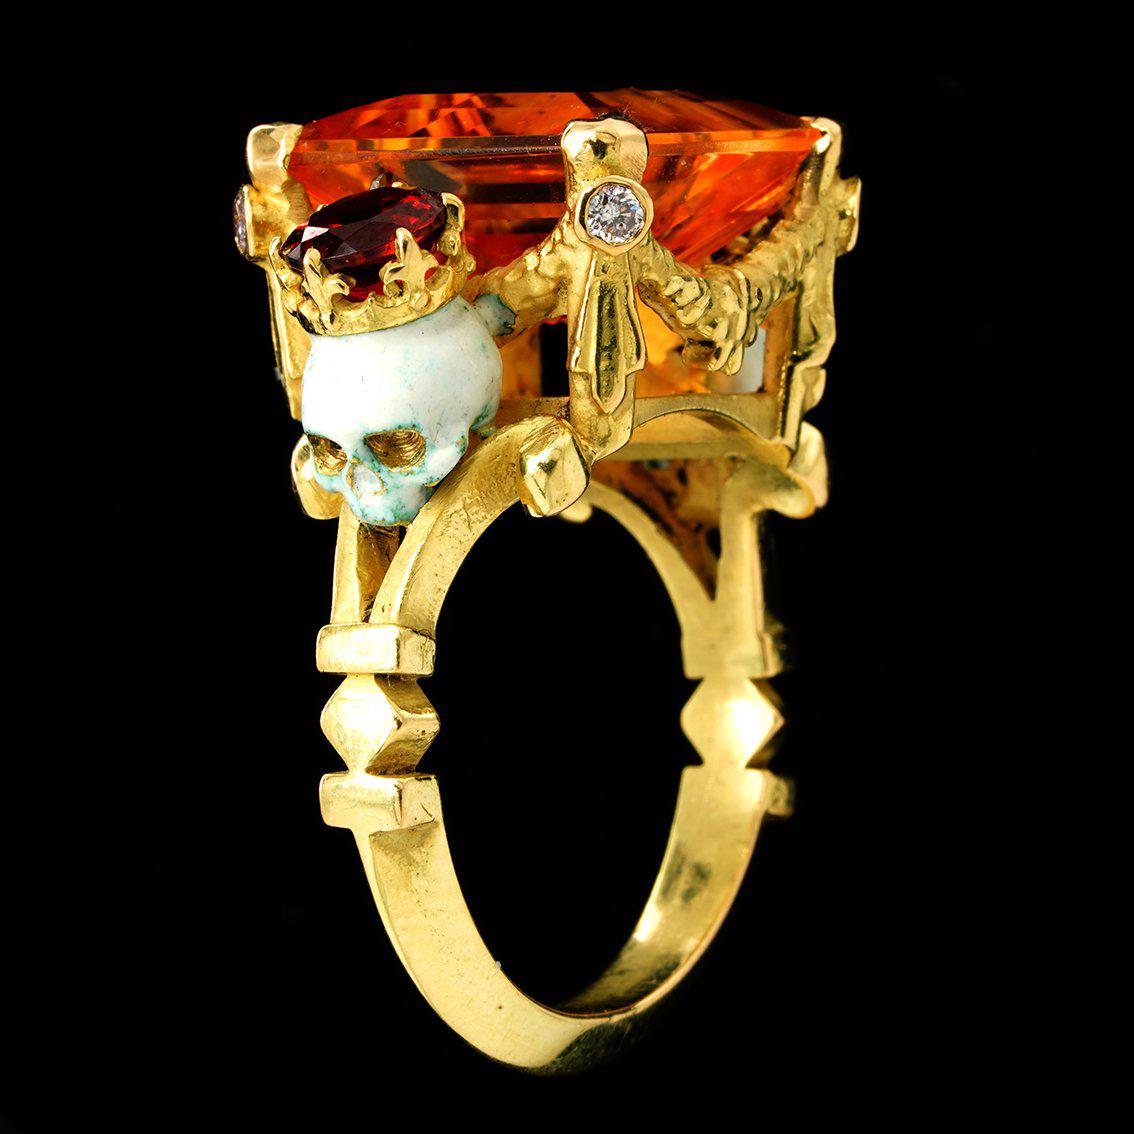 Catacomb Saints Garland Ring in 18 Karat Gold Citrine Garnets and Pink Diamonds For Sale 4